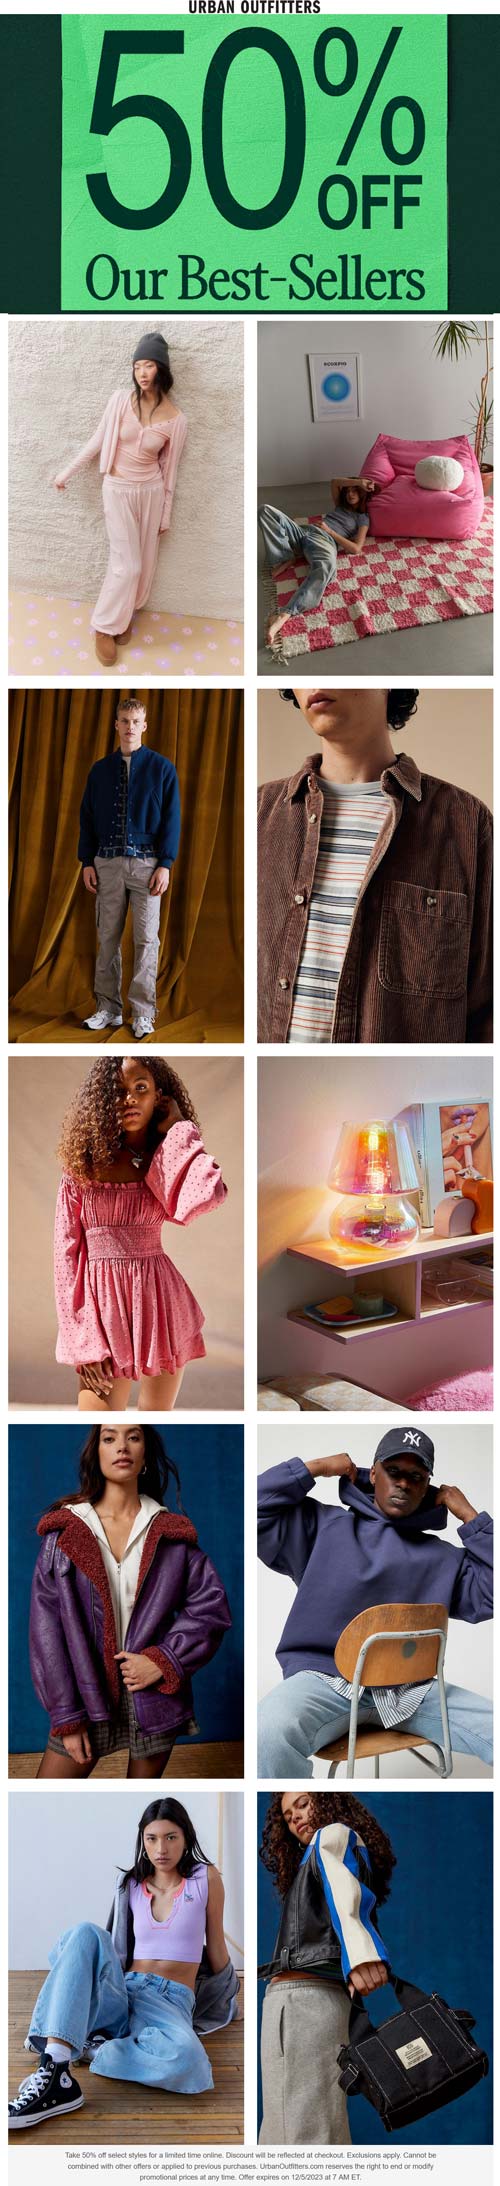 50% off best sellers at Urban Outfitters #urbanoutfitters